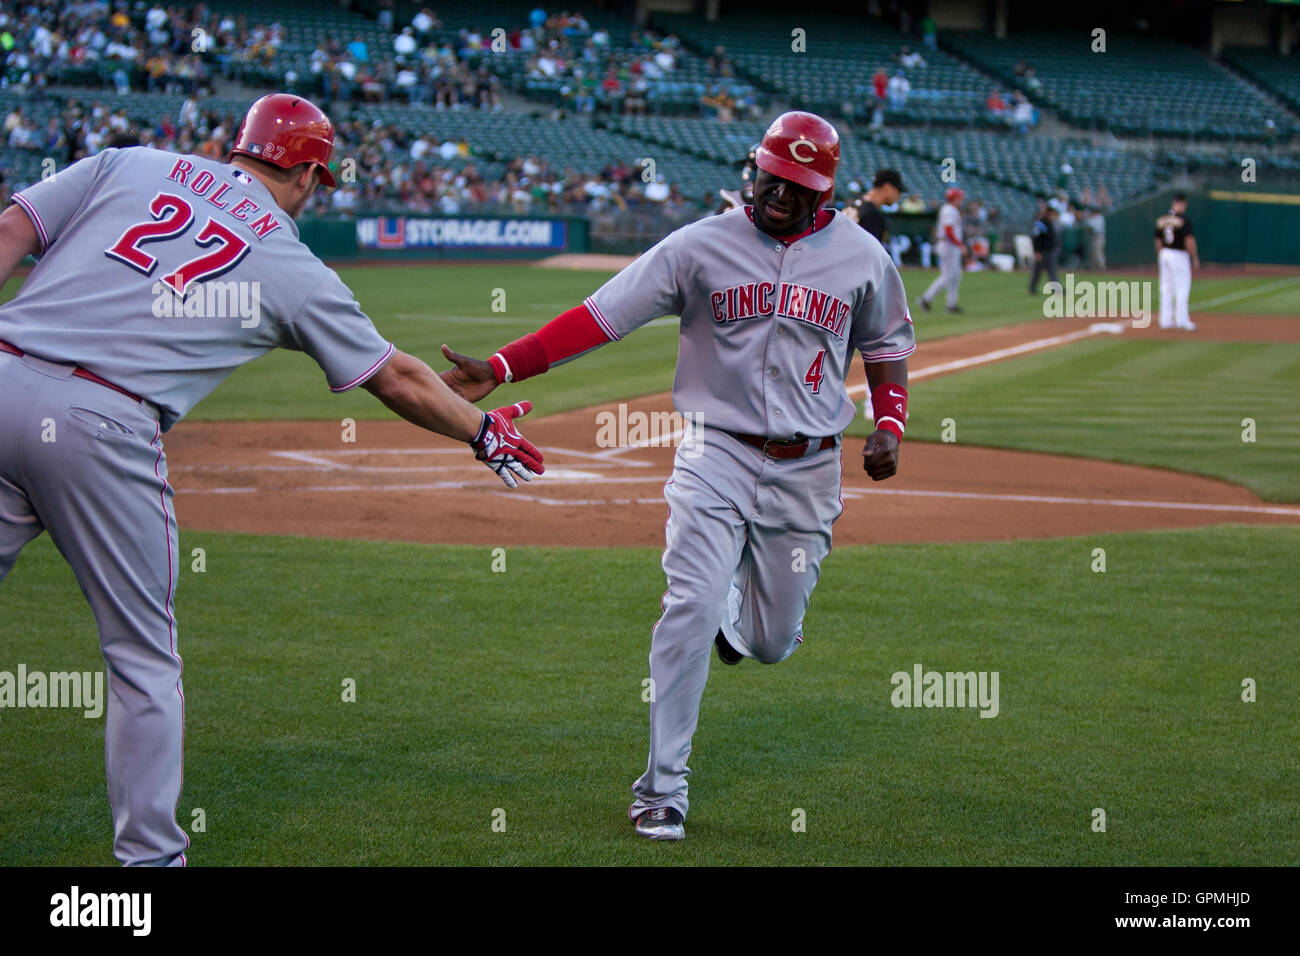 June 21, 2010; Oakland, CA, USA;  Cincinnati Reds second baseman Brandon Phillips (4) celebrates with third baseman Scott Rolen (27) after scoring a run against the Oakland Athletics during the first inning at Oakland-Alameda County Coliseum. Stock Photo